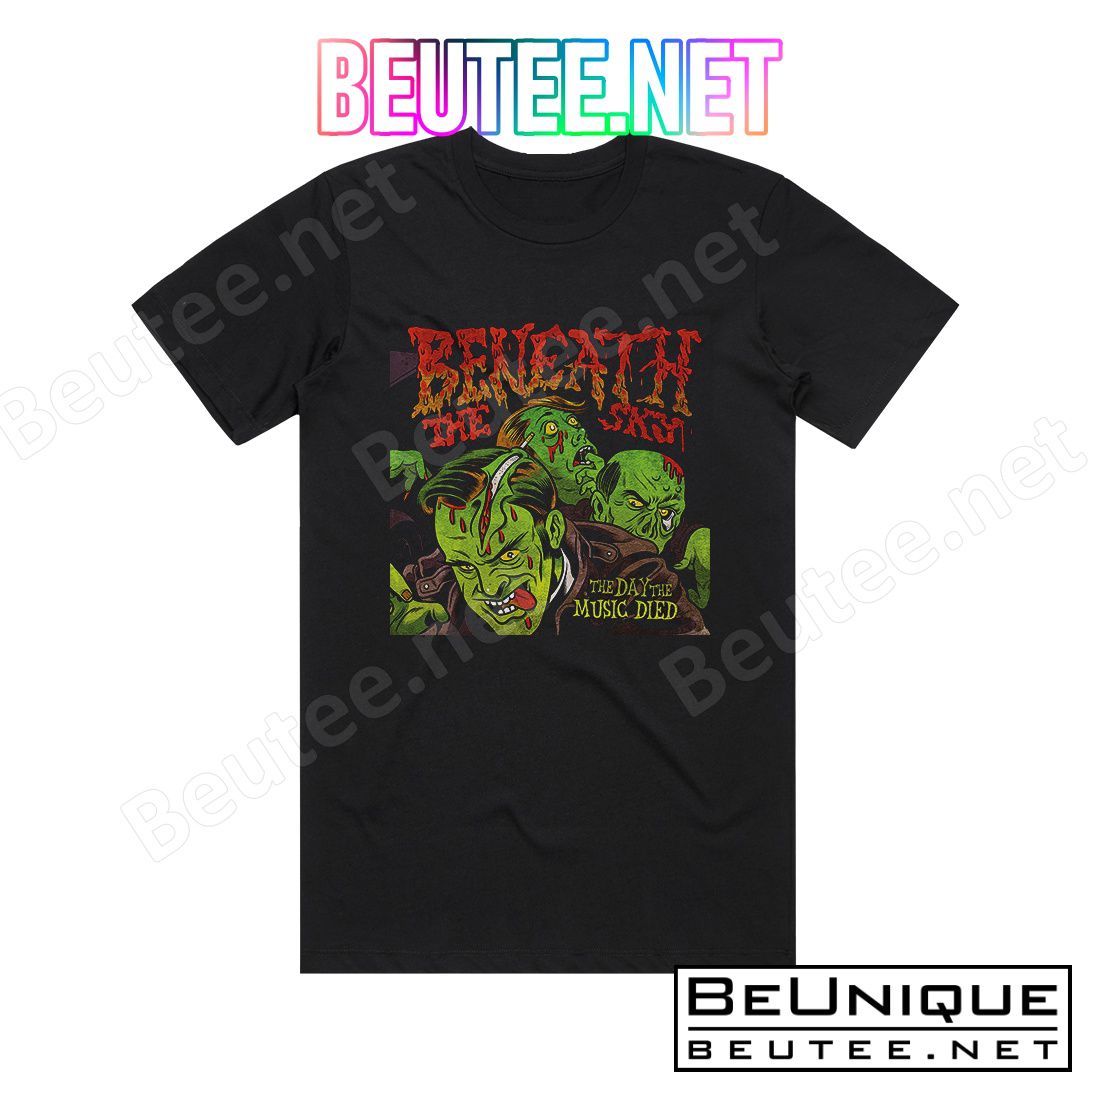 Beneath the Sky The Day The Music Died Album Cover T-Shirt